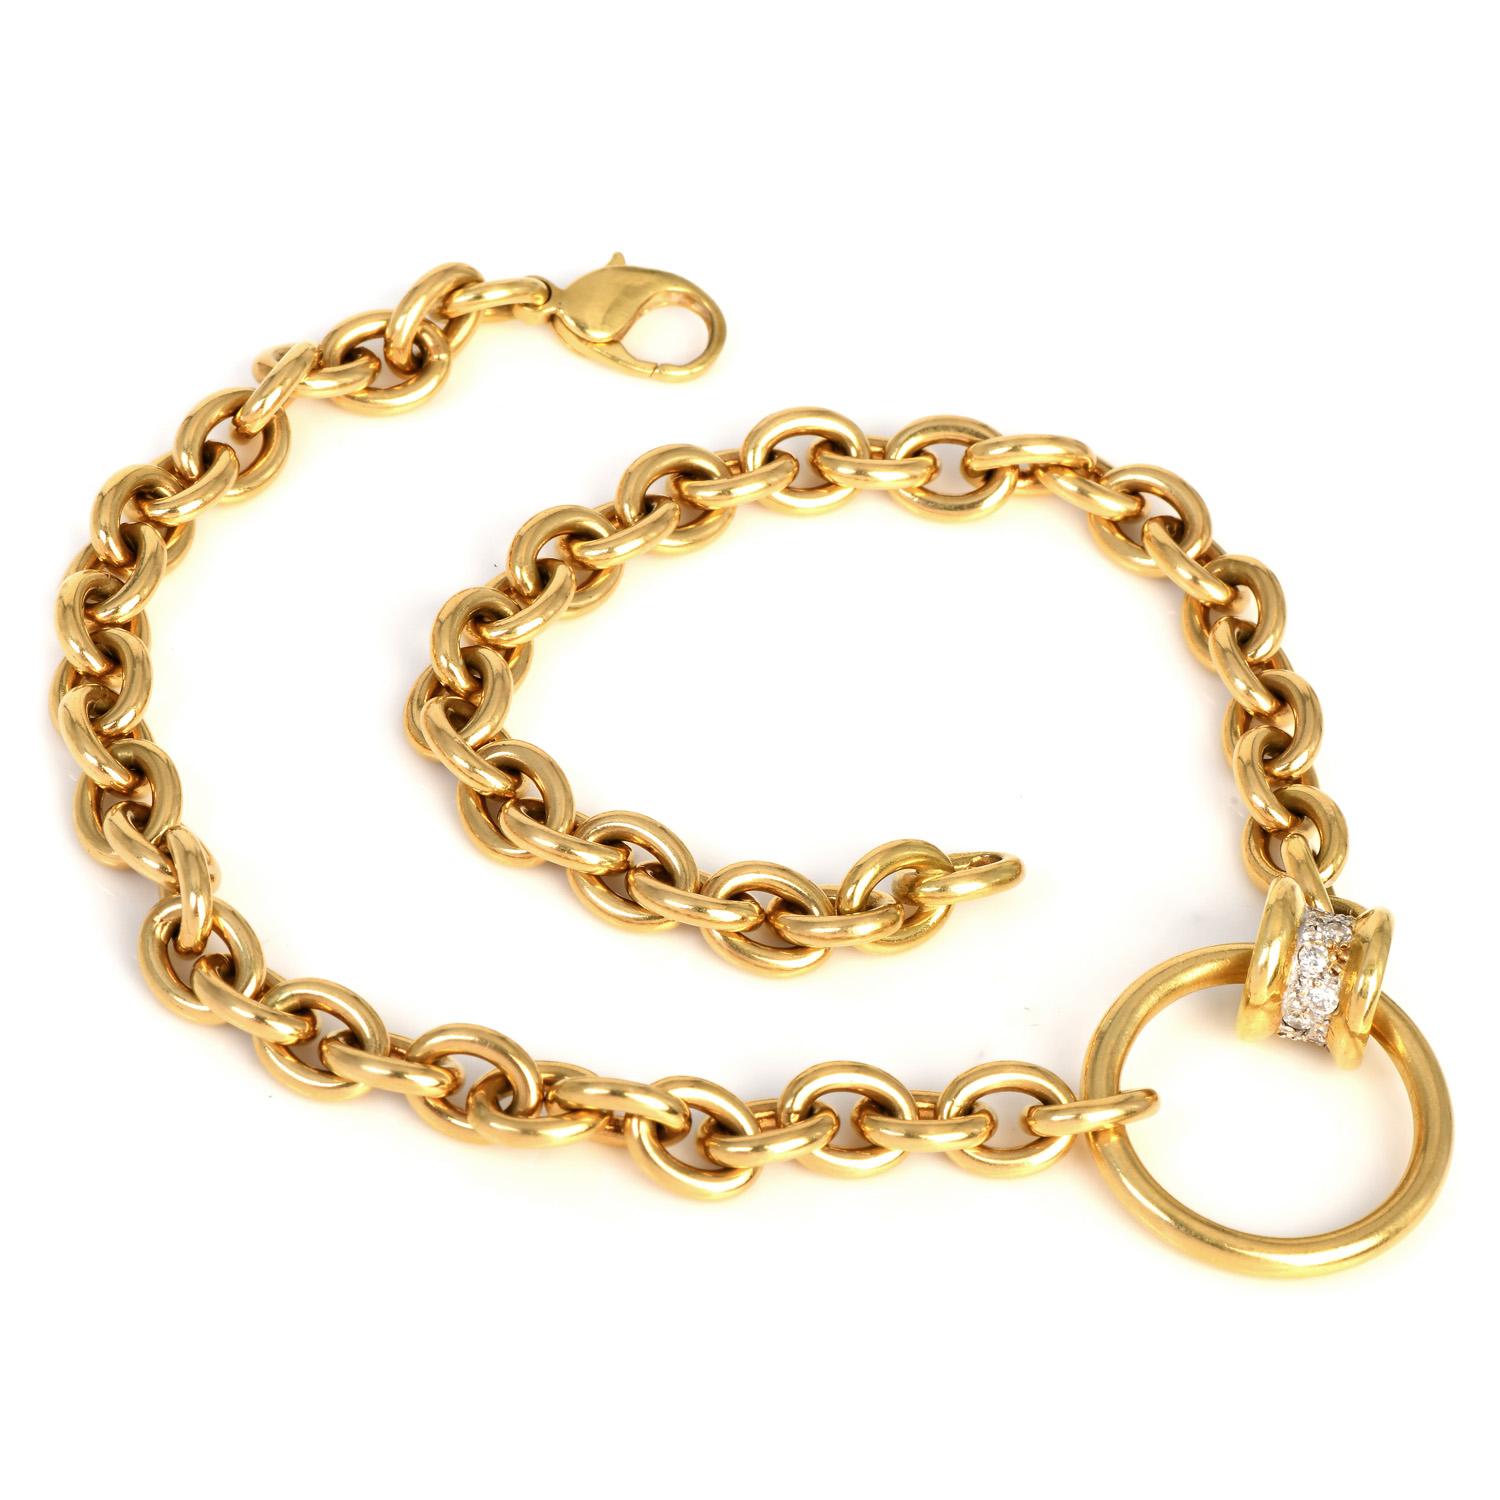 how to shorten a gold chain without cutting